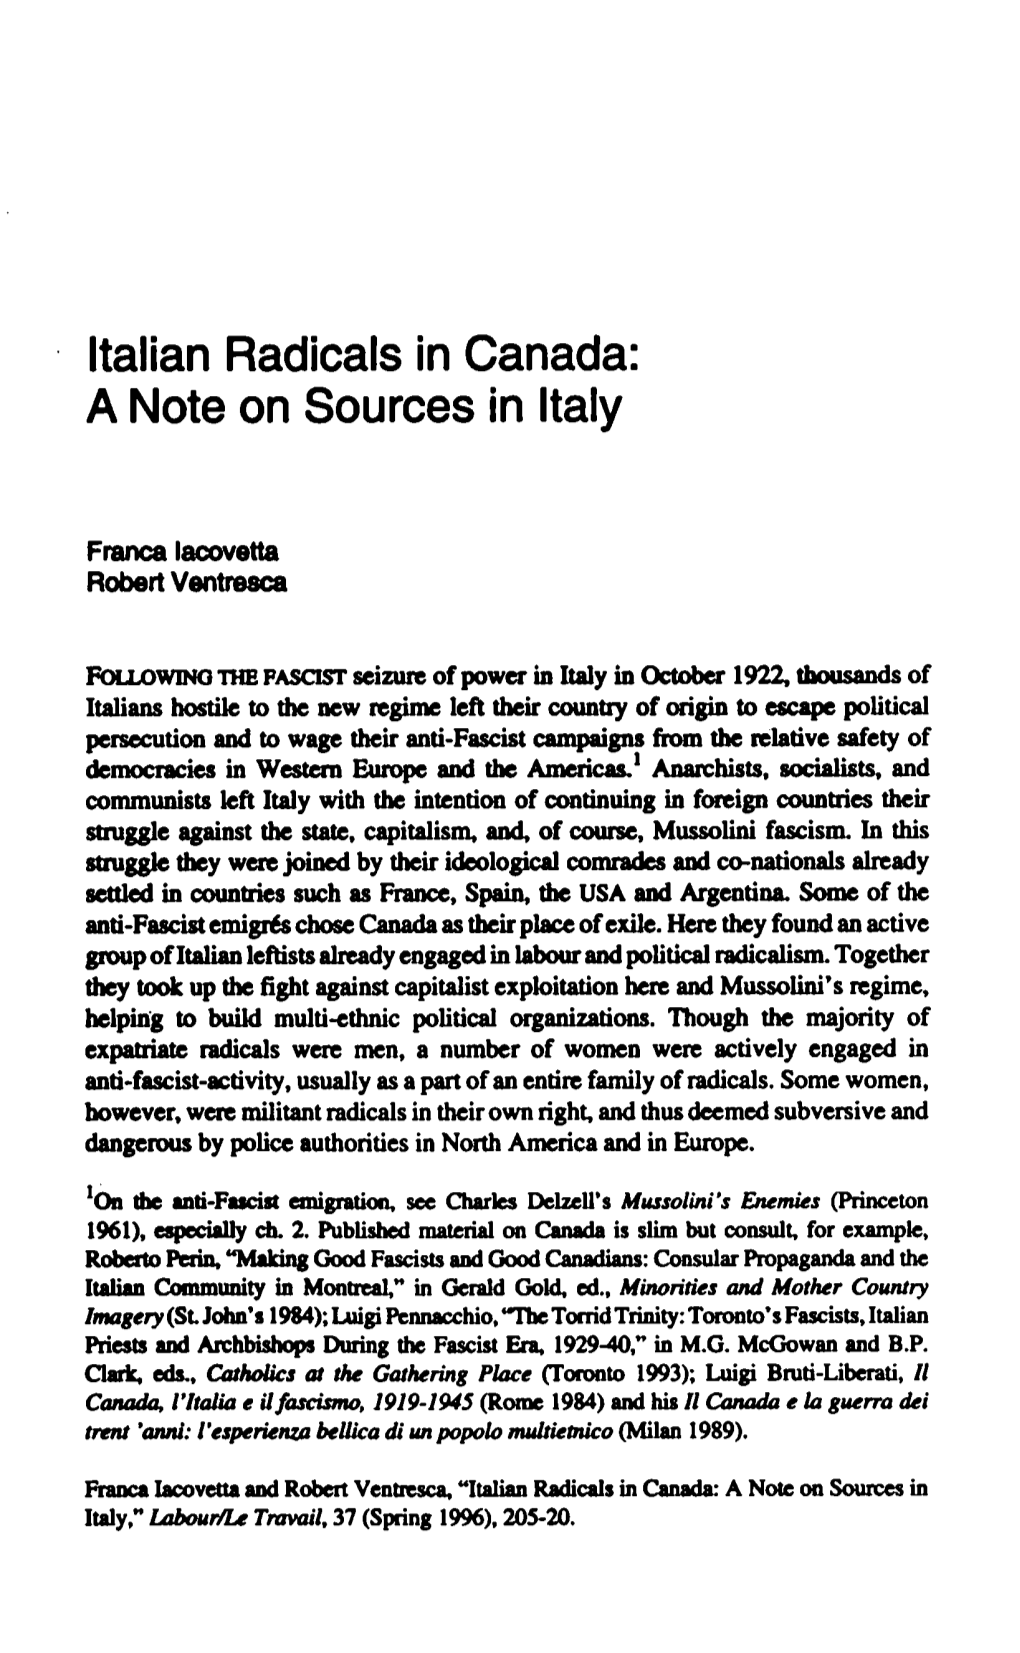 Italian Radicals in Canada: a Note on Sources in Italy